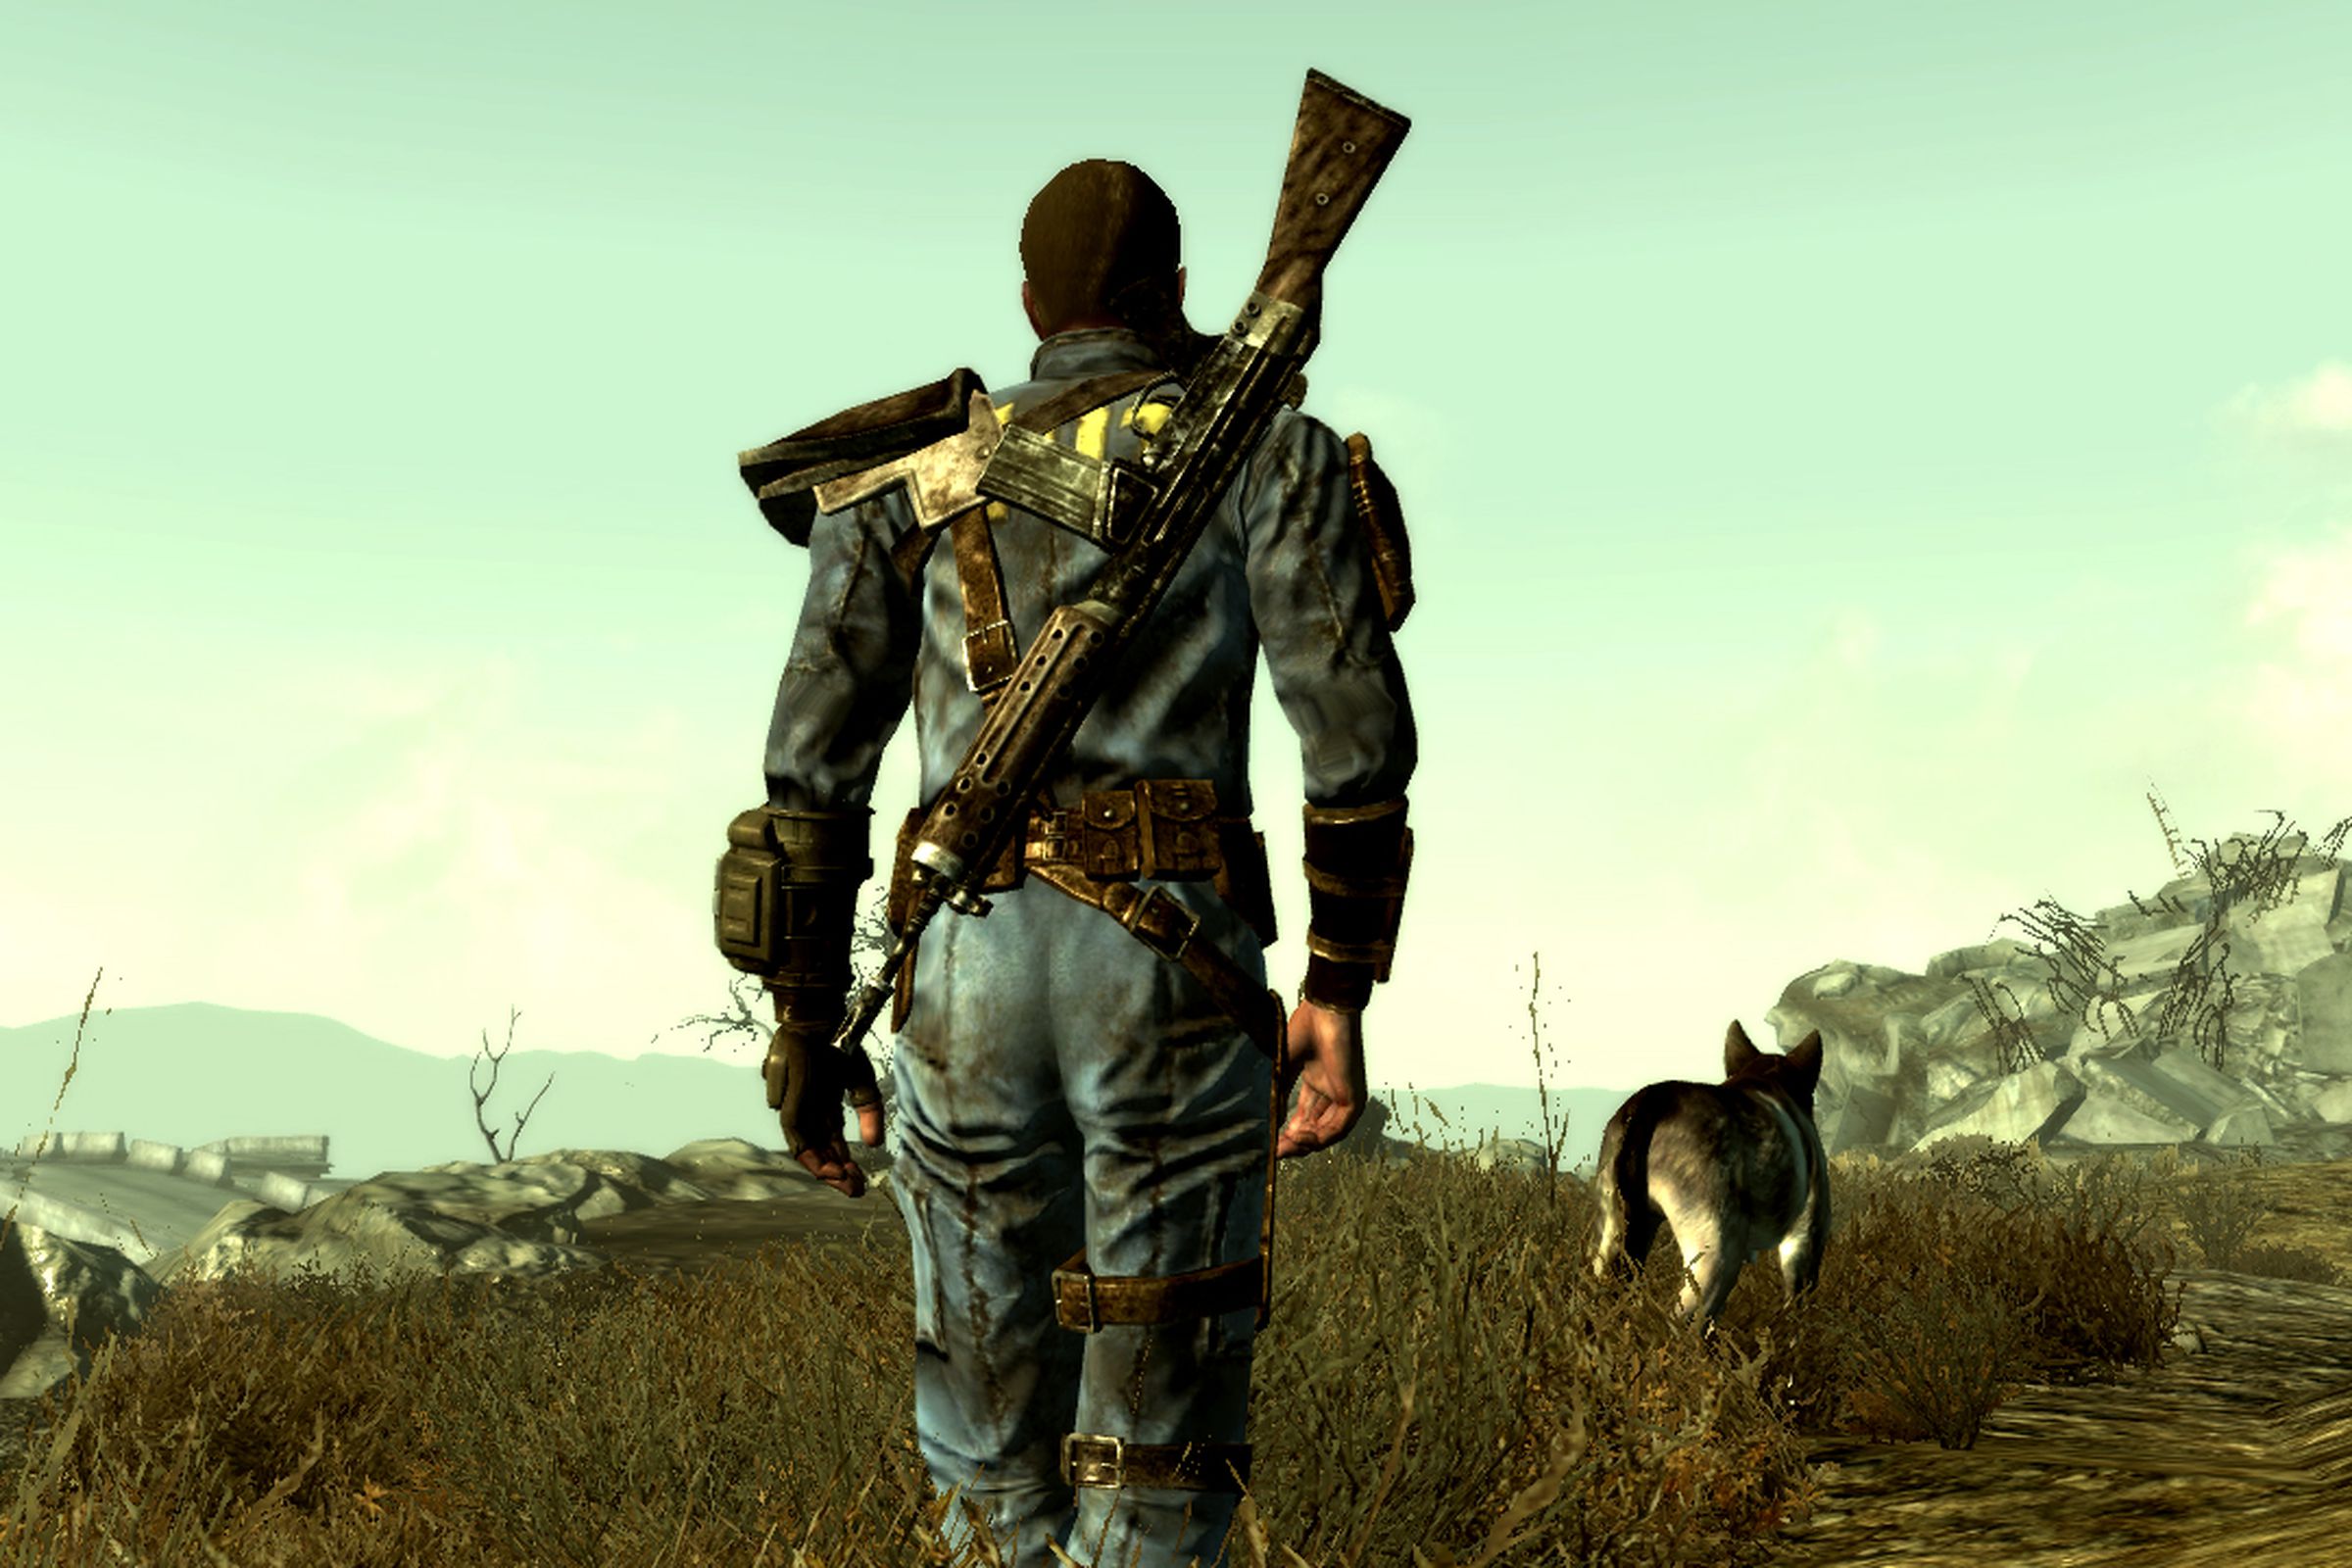 Screenshot from Fallout 3 featuring a behind-the-back shot of the Vault Dweller character as they walk through the wasteland.